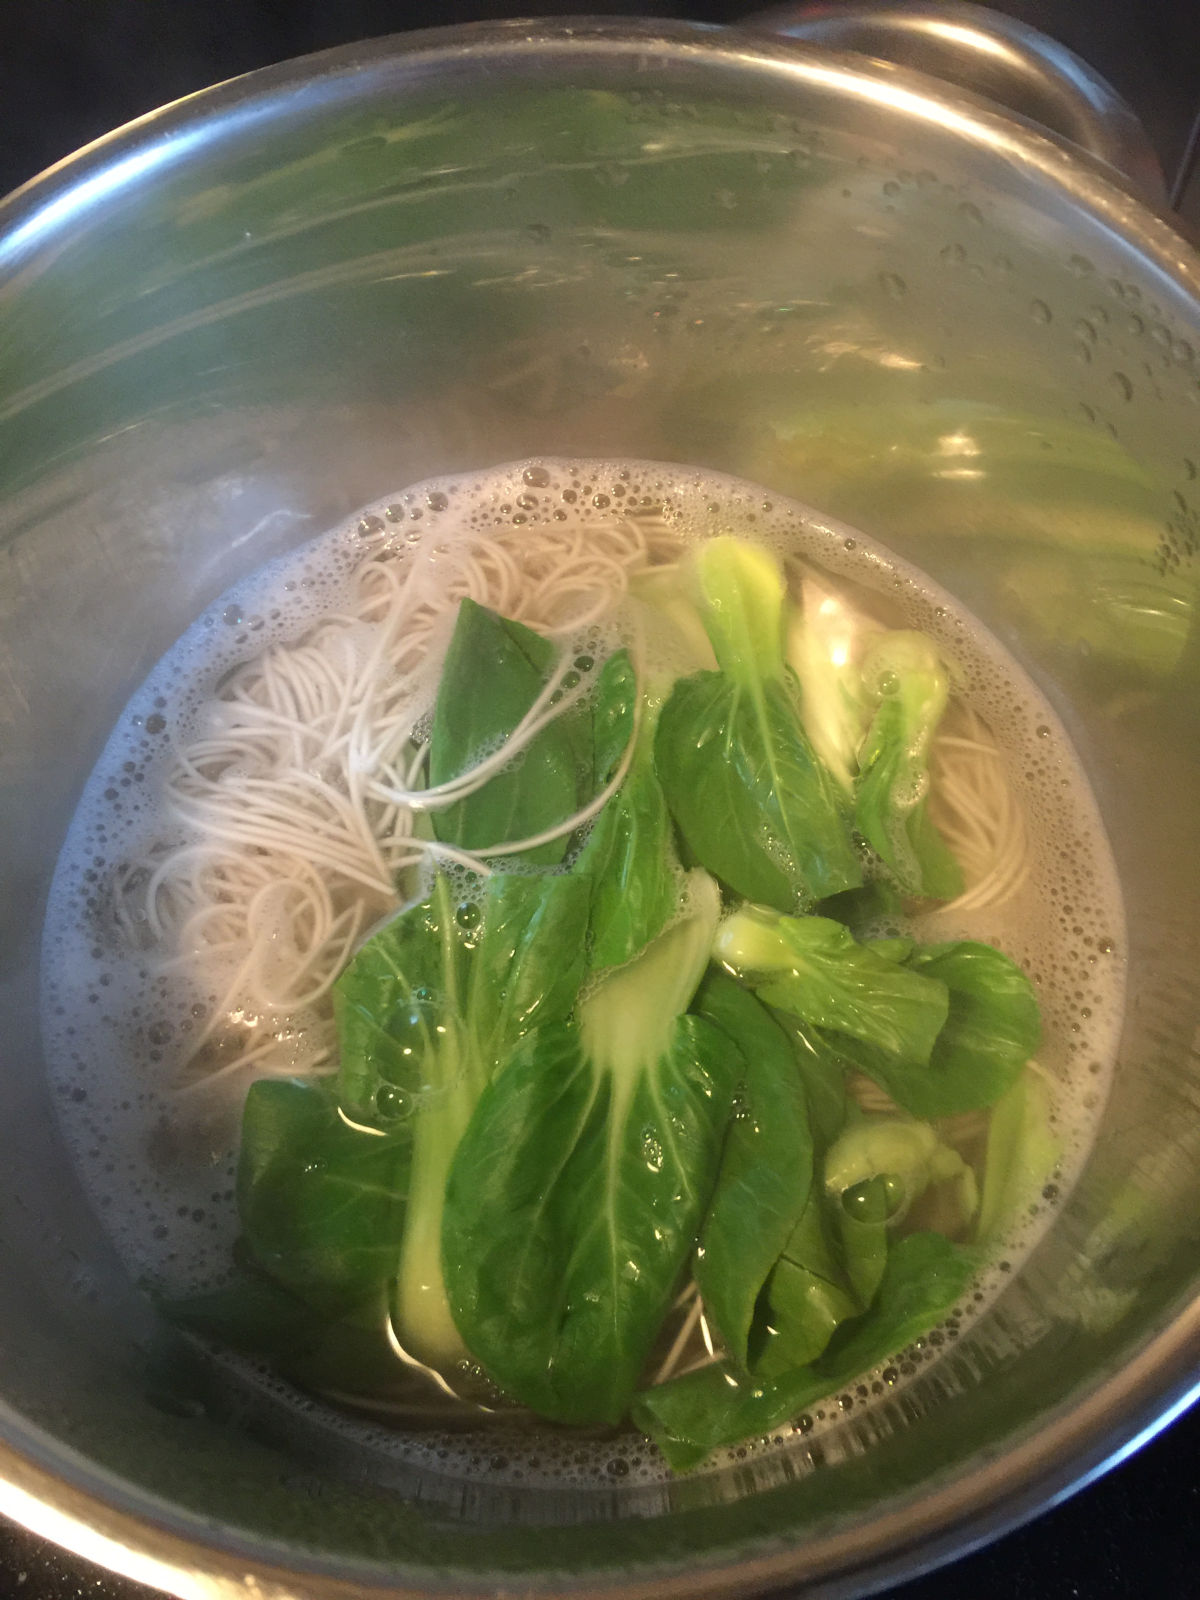 Overhead view of boiling noodles and bok choy in a stainless steel pot.